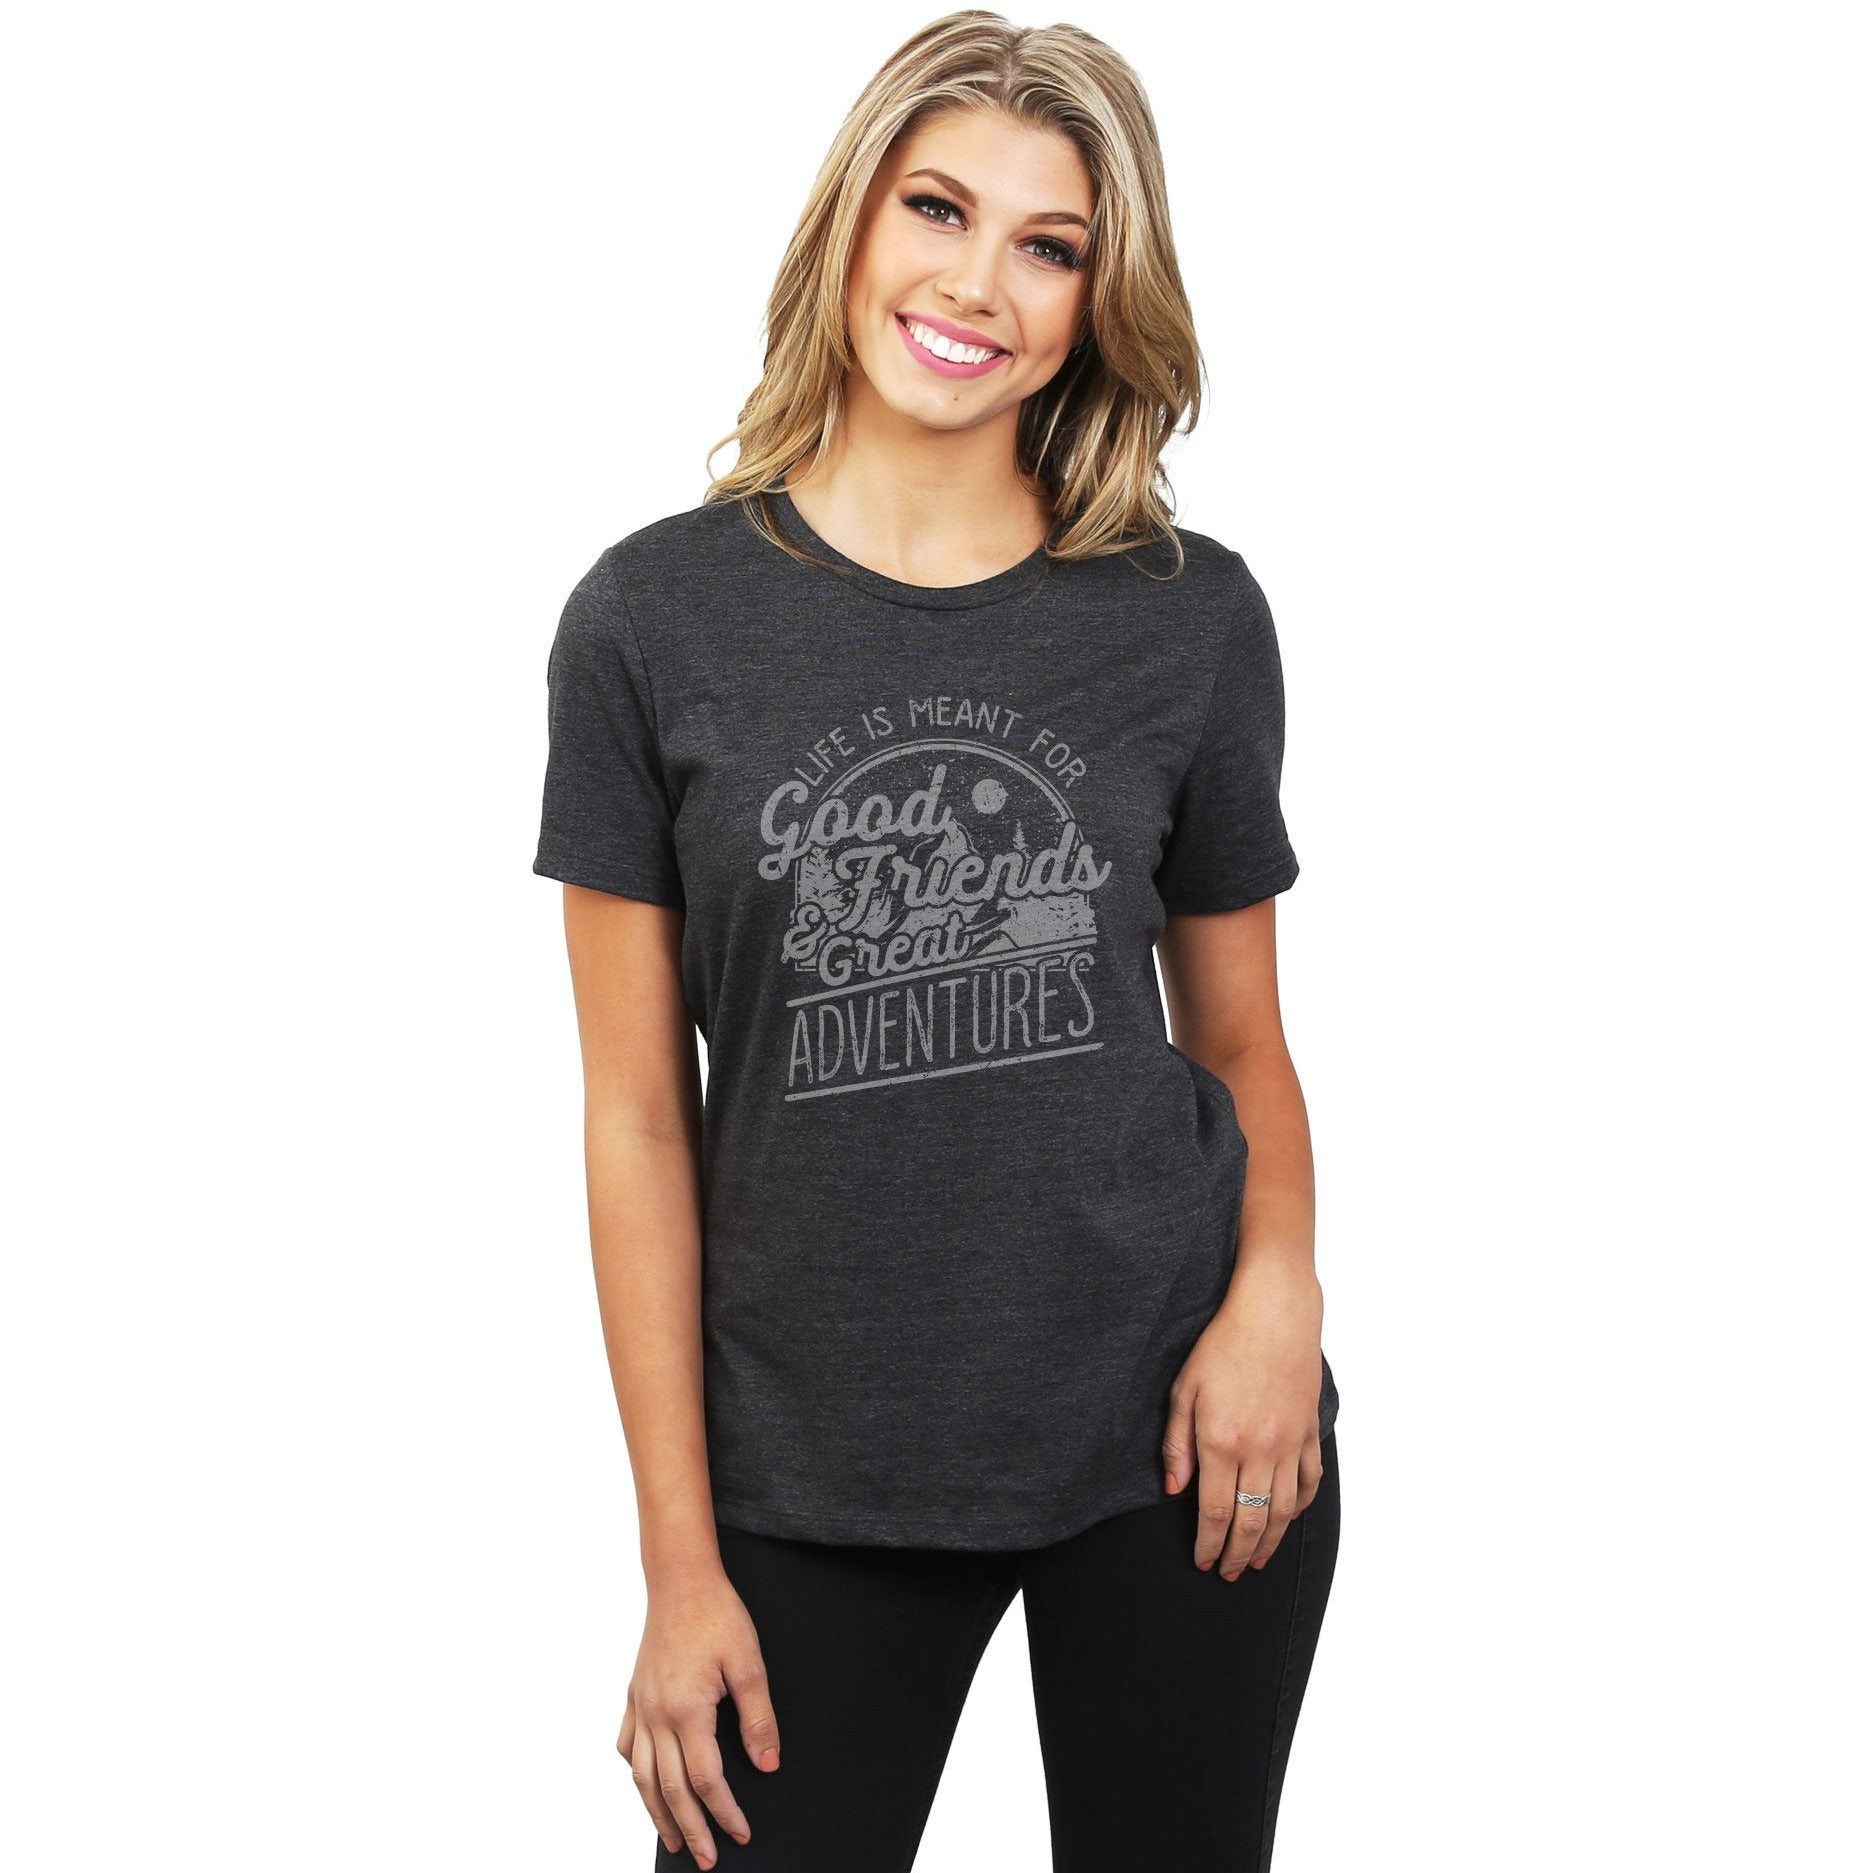 Good Friends And Great Adventures Women's Relaxed Crewneck T-Shirt Top Tee Charcoal Model
